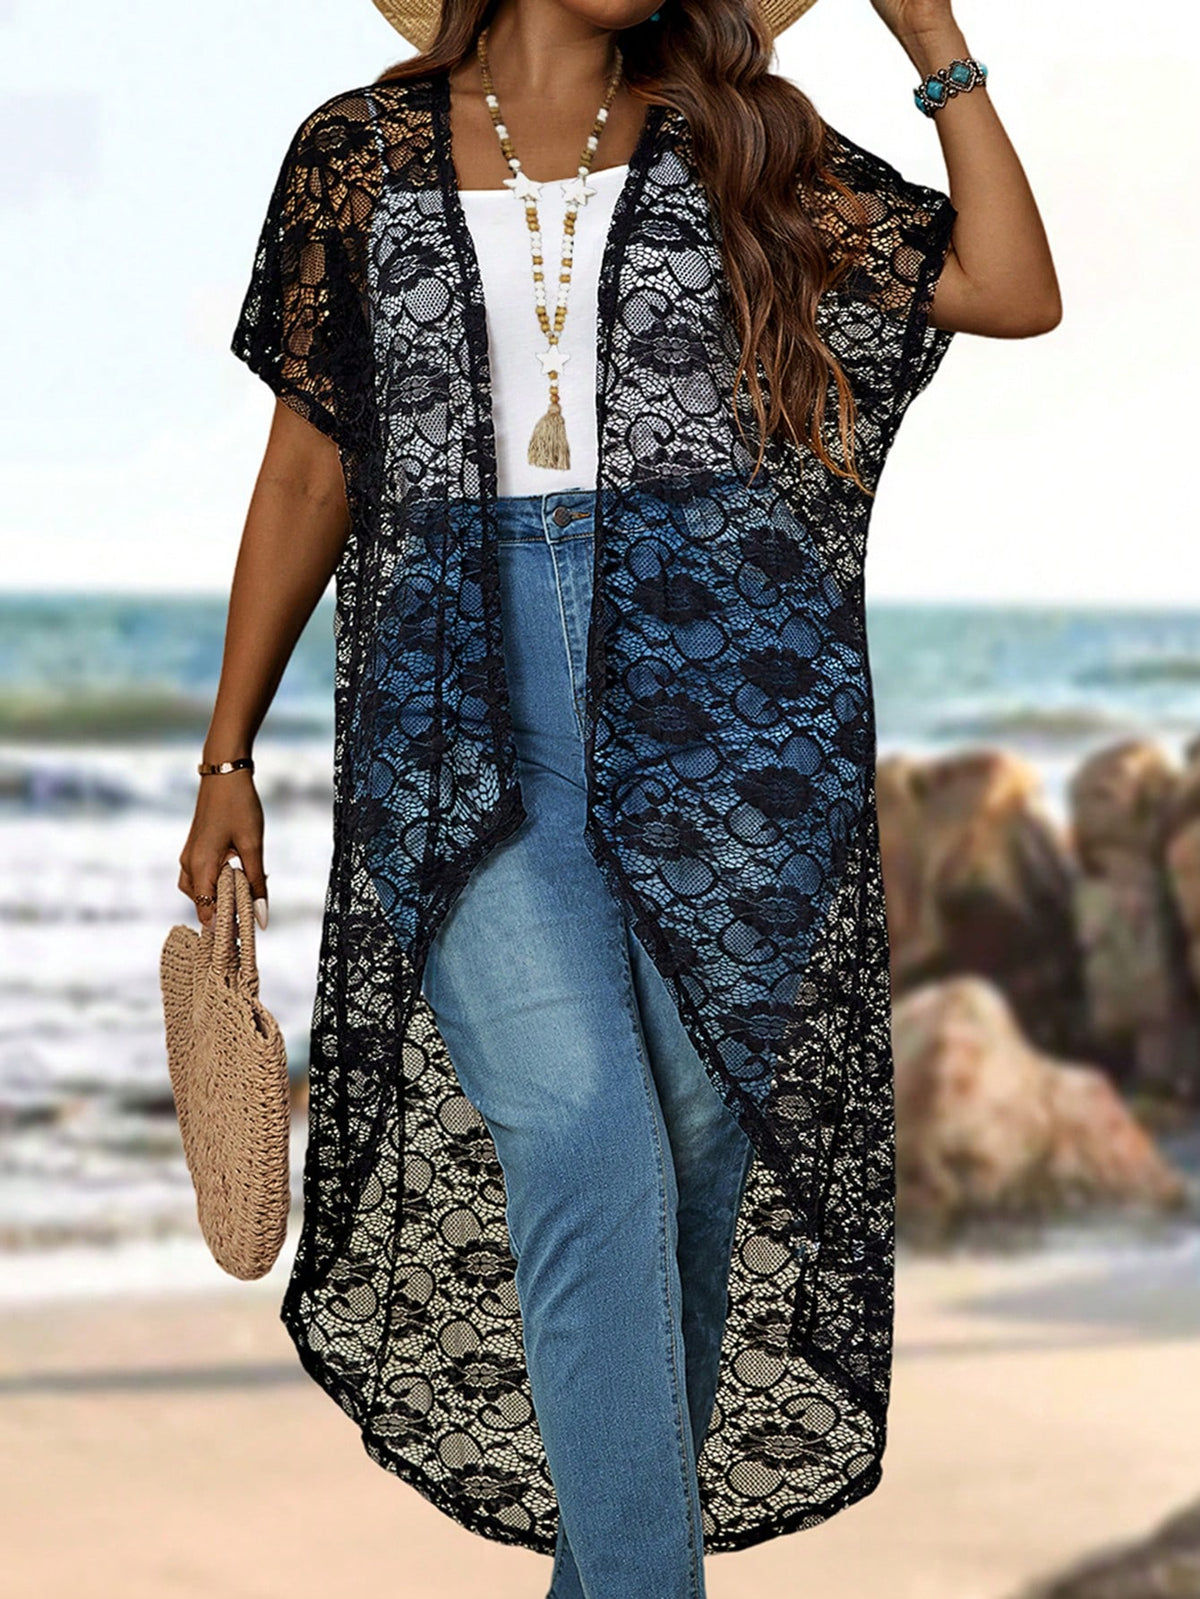 EMERY ROSE Plus Size Women's Black Lace Short Sleeve Front Open Jacket For Summer